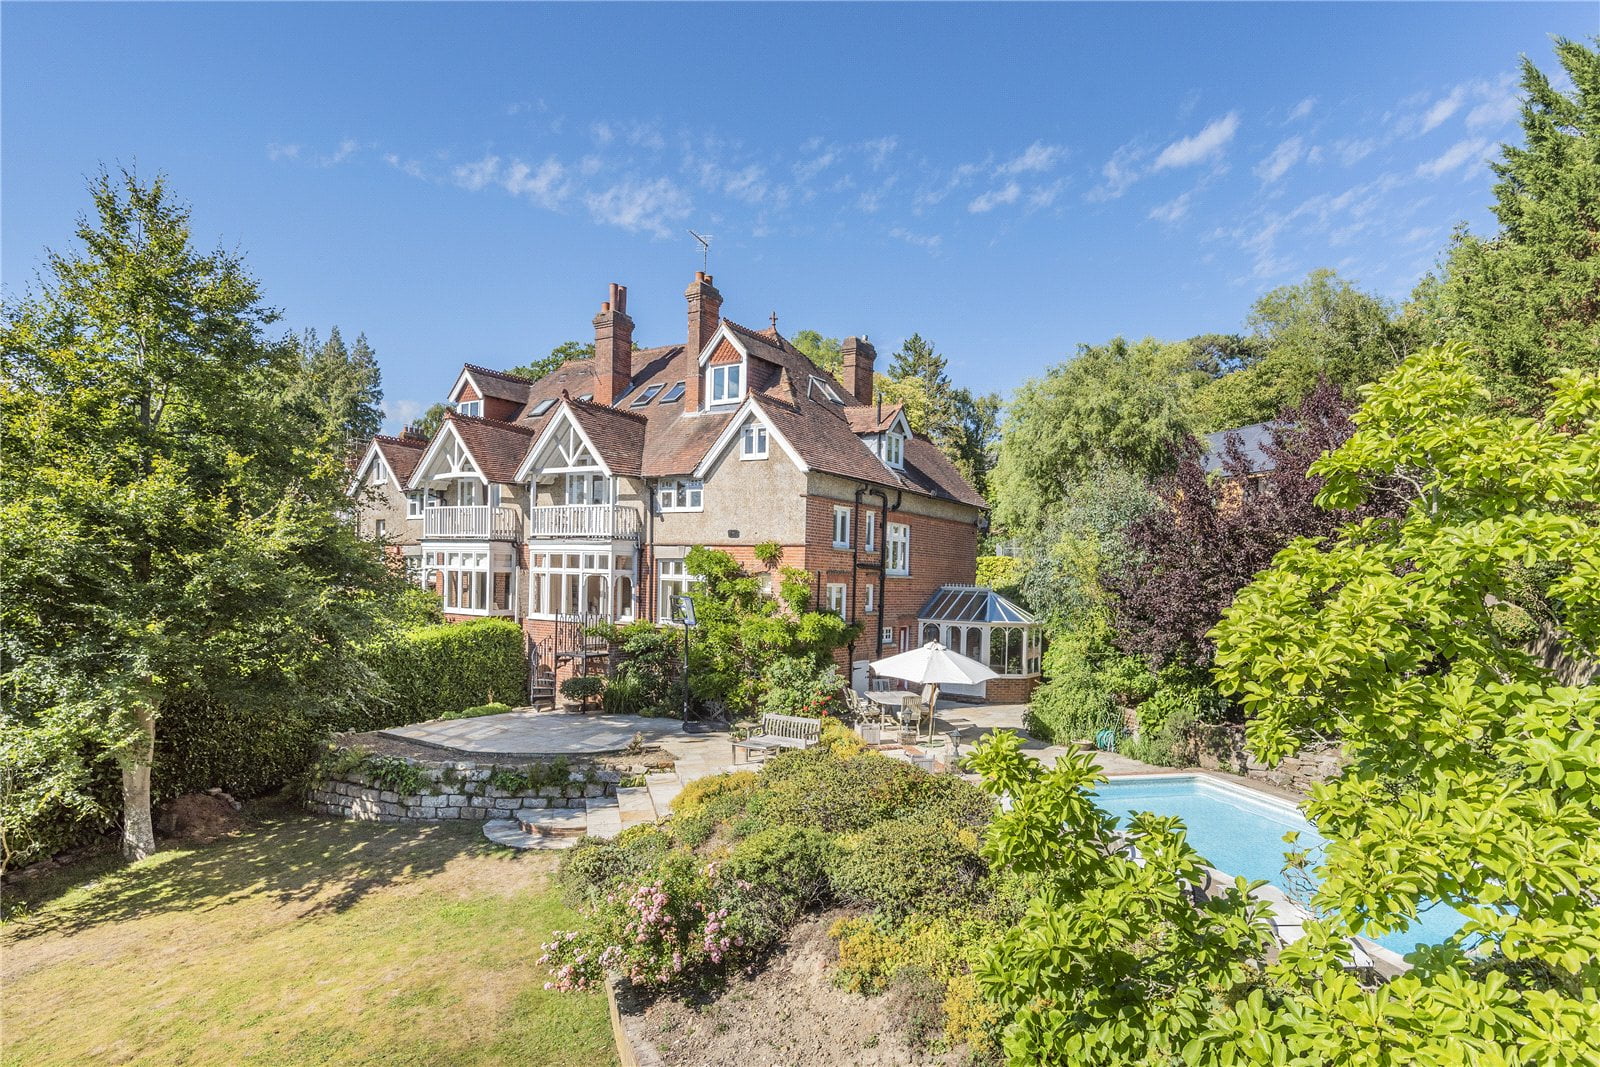 Station Road, Wadhurst, East Sussex,  | residential-sales